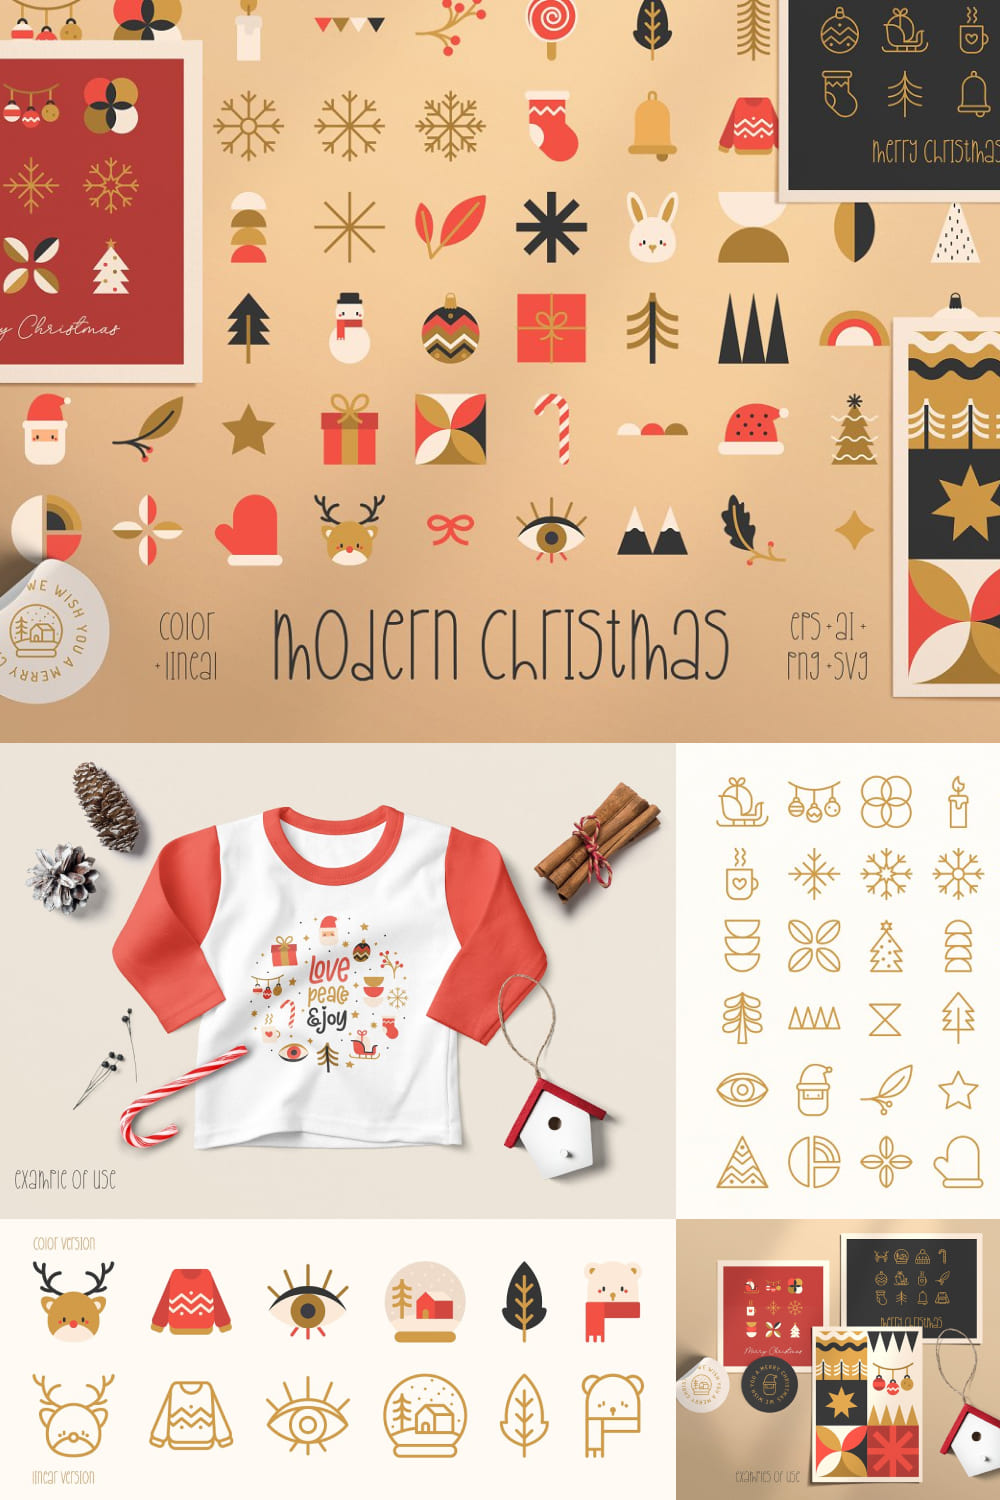 Illustrations cute christmas vector icon set of pinterest.